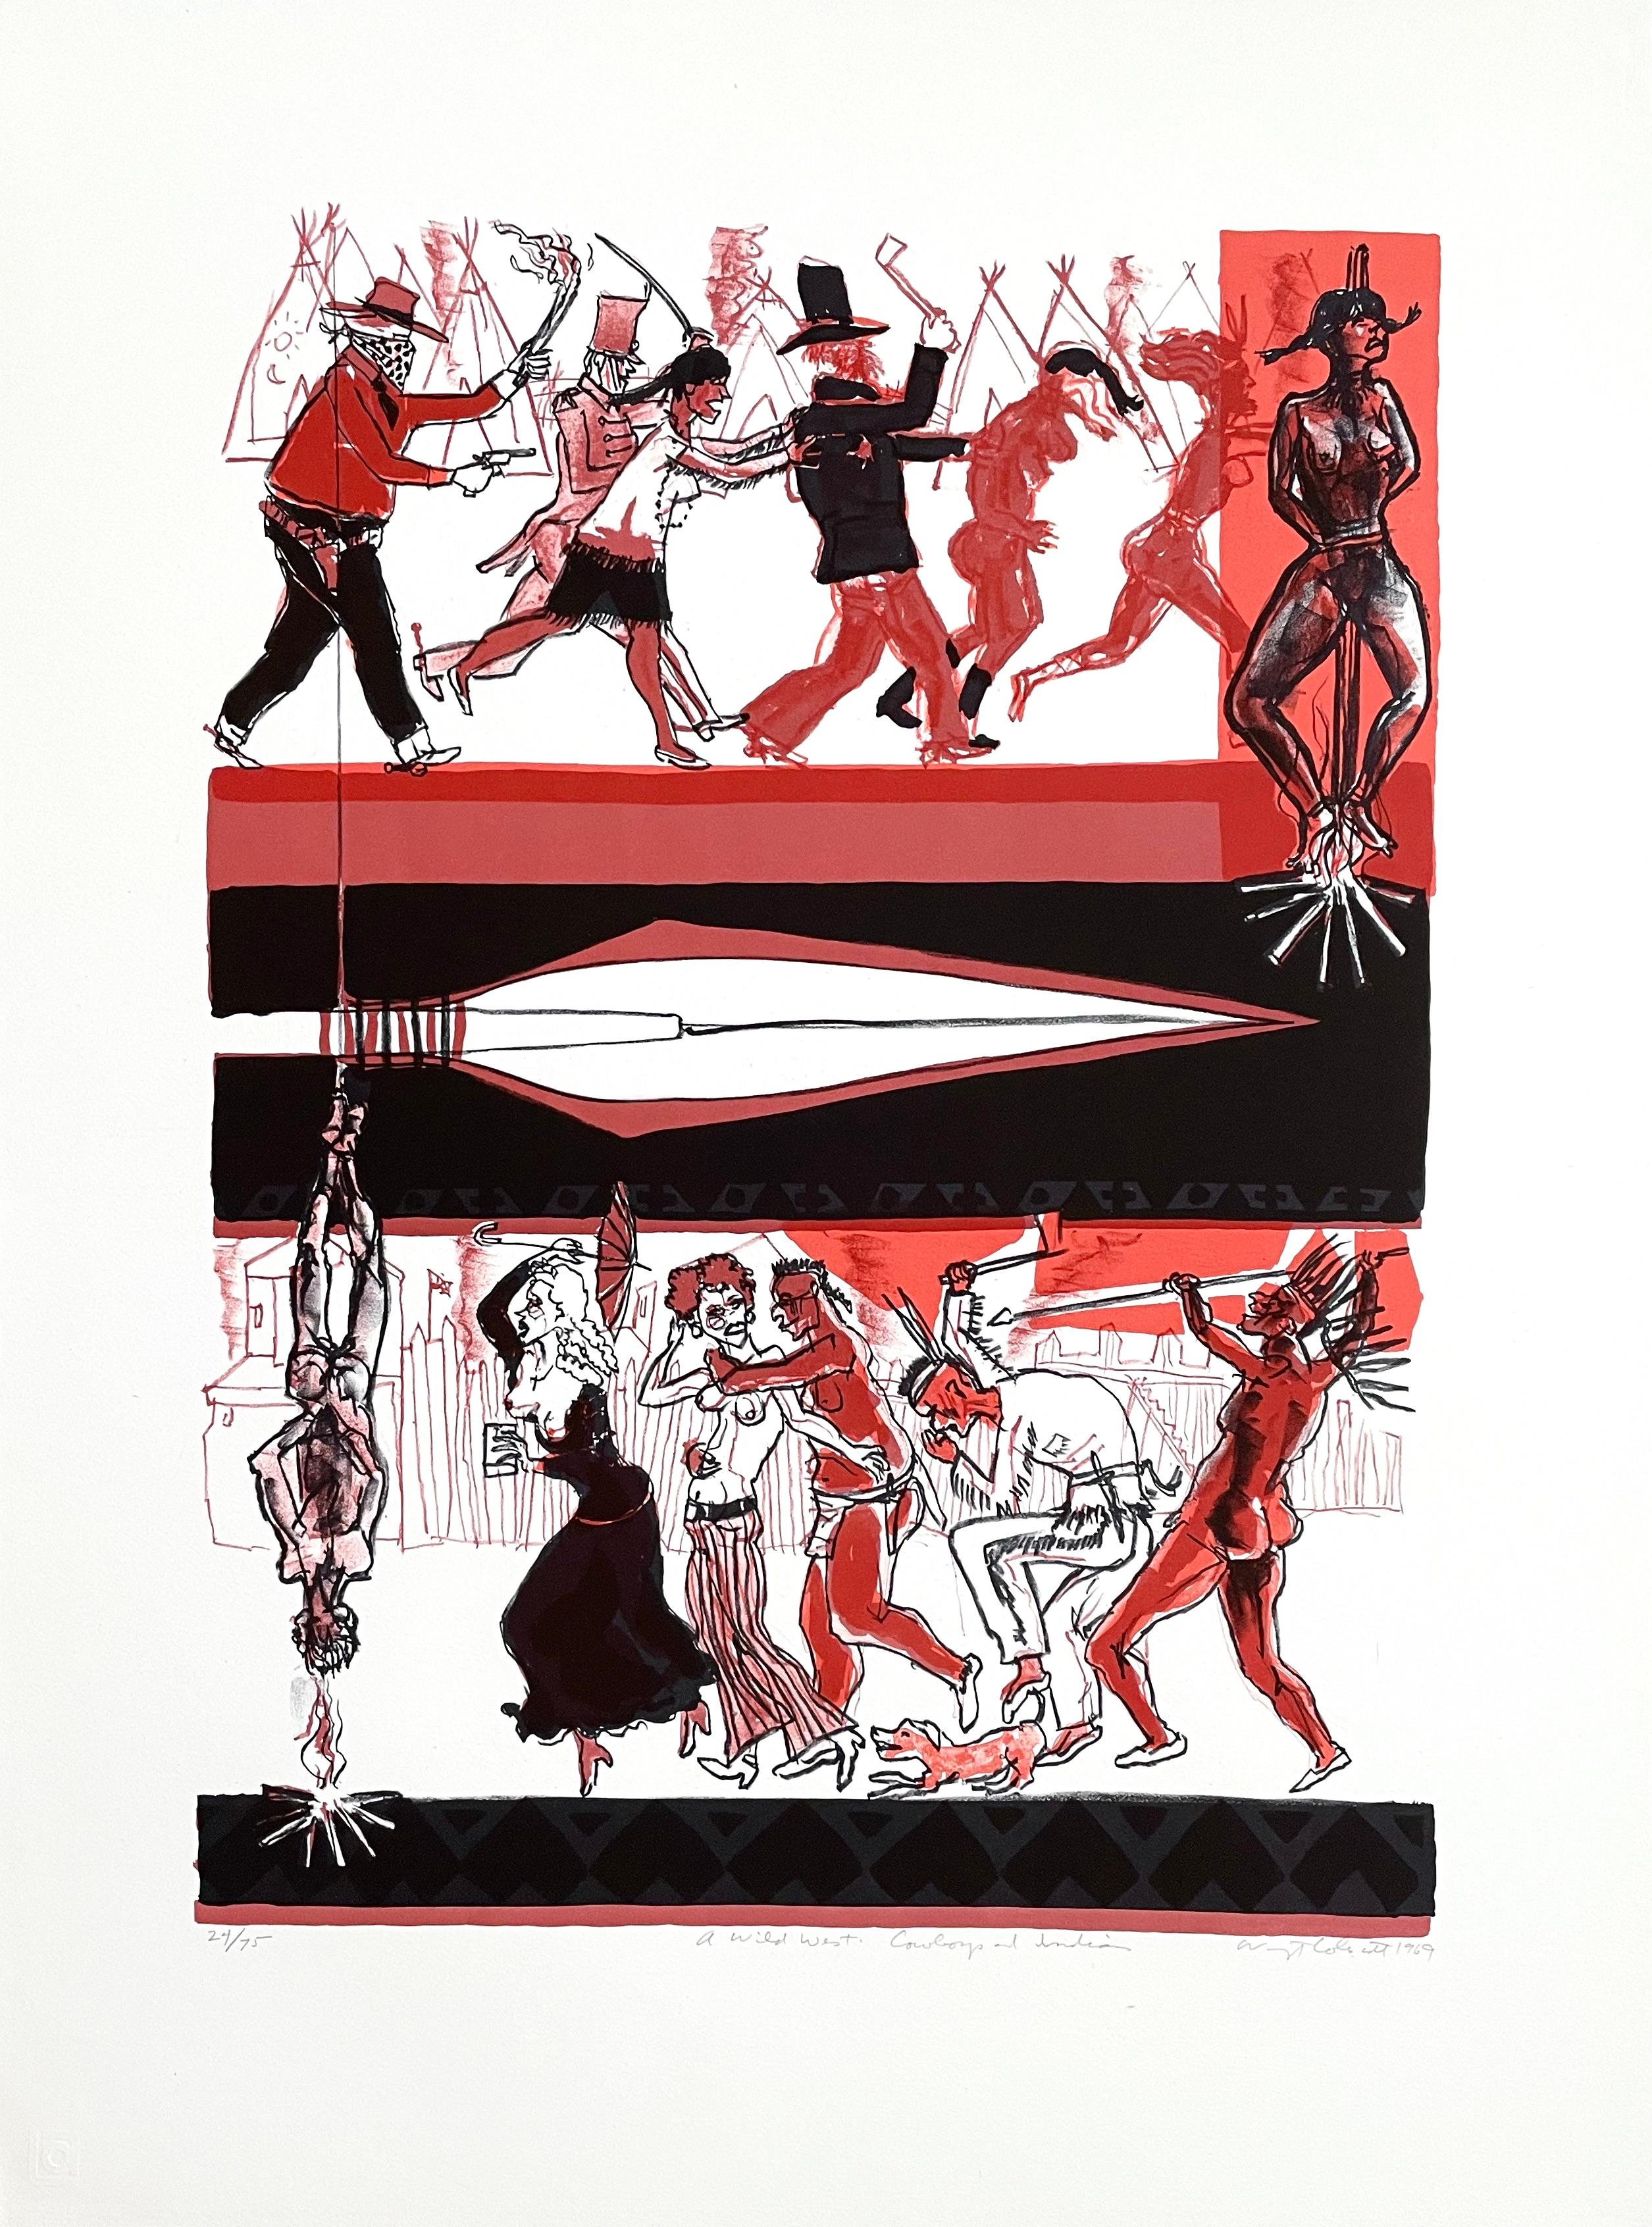 Artist: Warrington Colescott (1921-2018)
Title: Cowboys and Indians
Year: 1969
Edition: 24/75, plus proofs
Medium: Lithograph on paper
Inscription: Signed & numbered in pencil
Size: 31 x 23 inches
Condition: Good
Notes: Published by London Arts